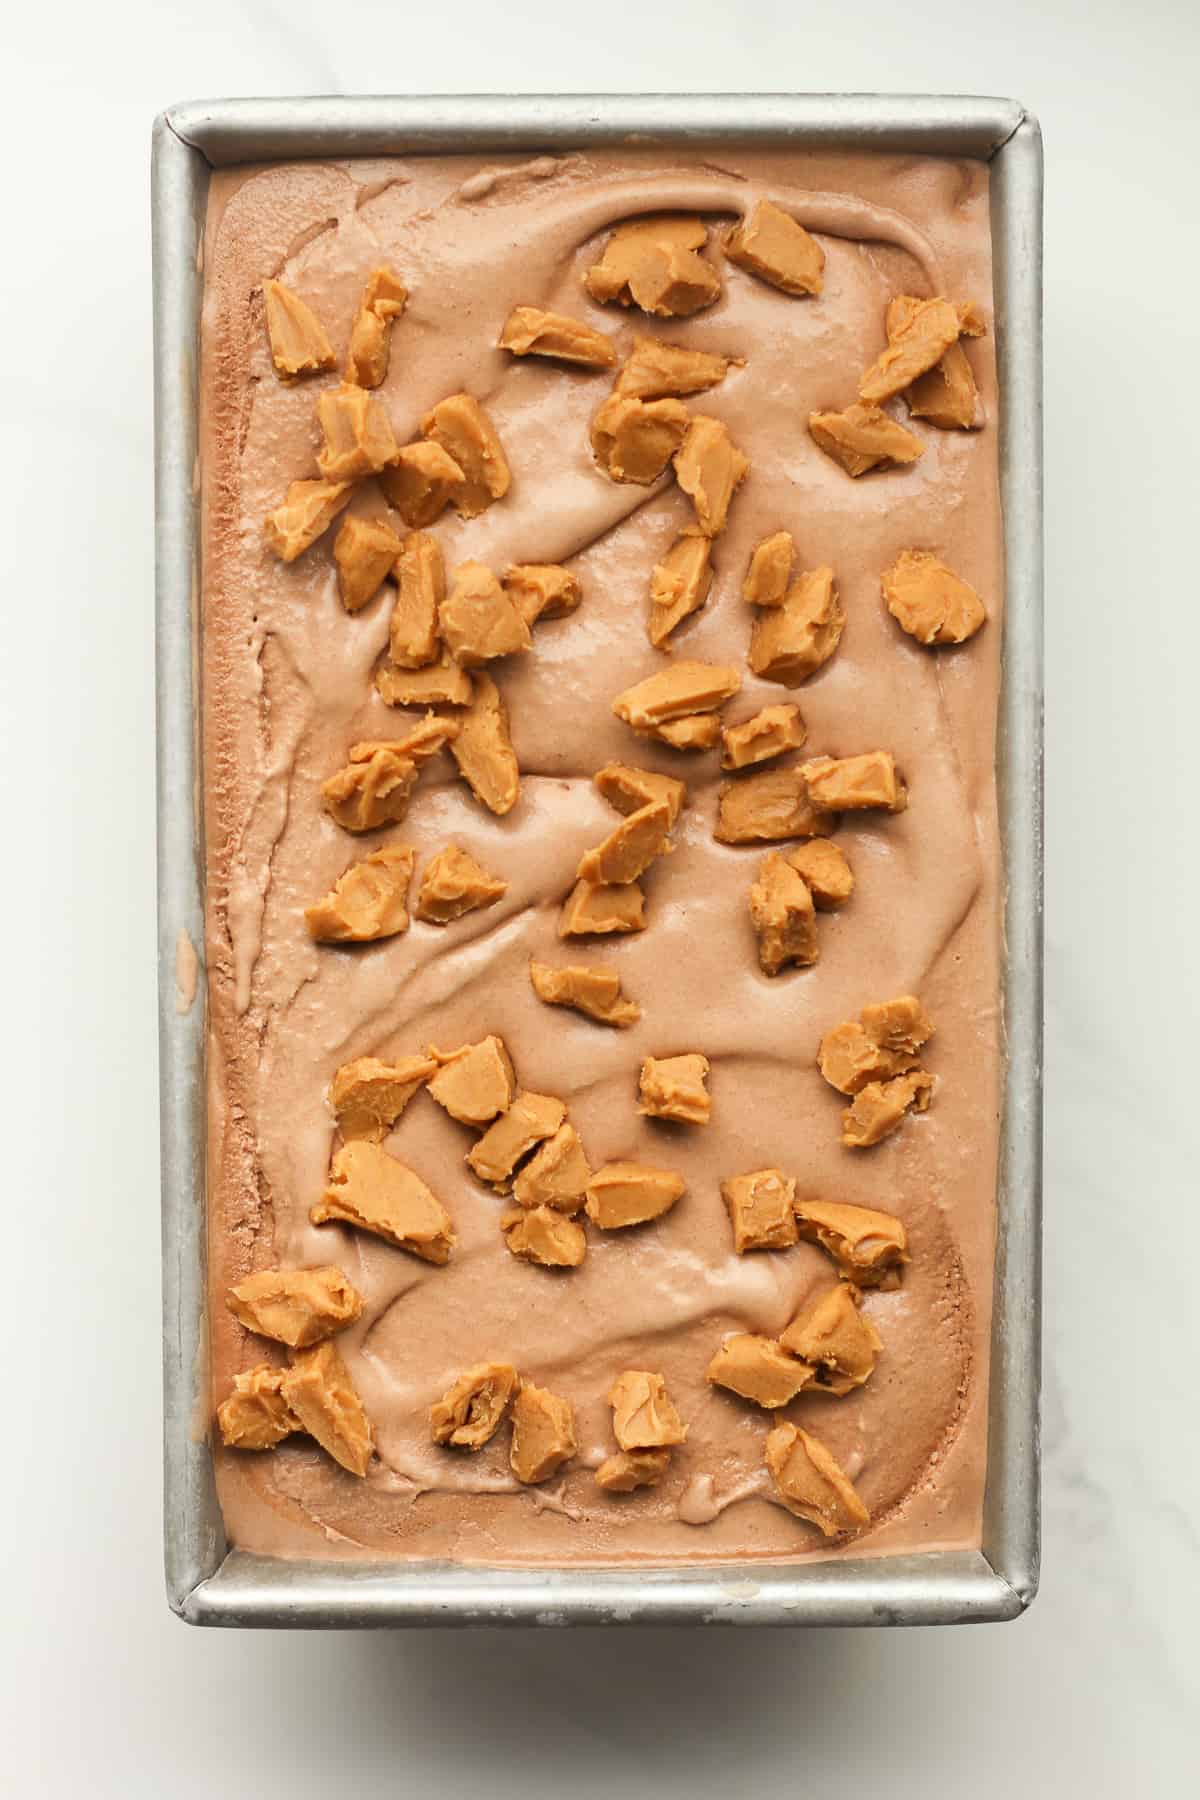 A pan of chocolate peanut butter ice cream with chunks of peanut butter on top.